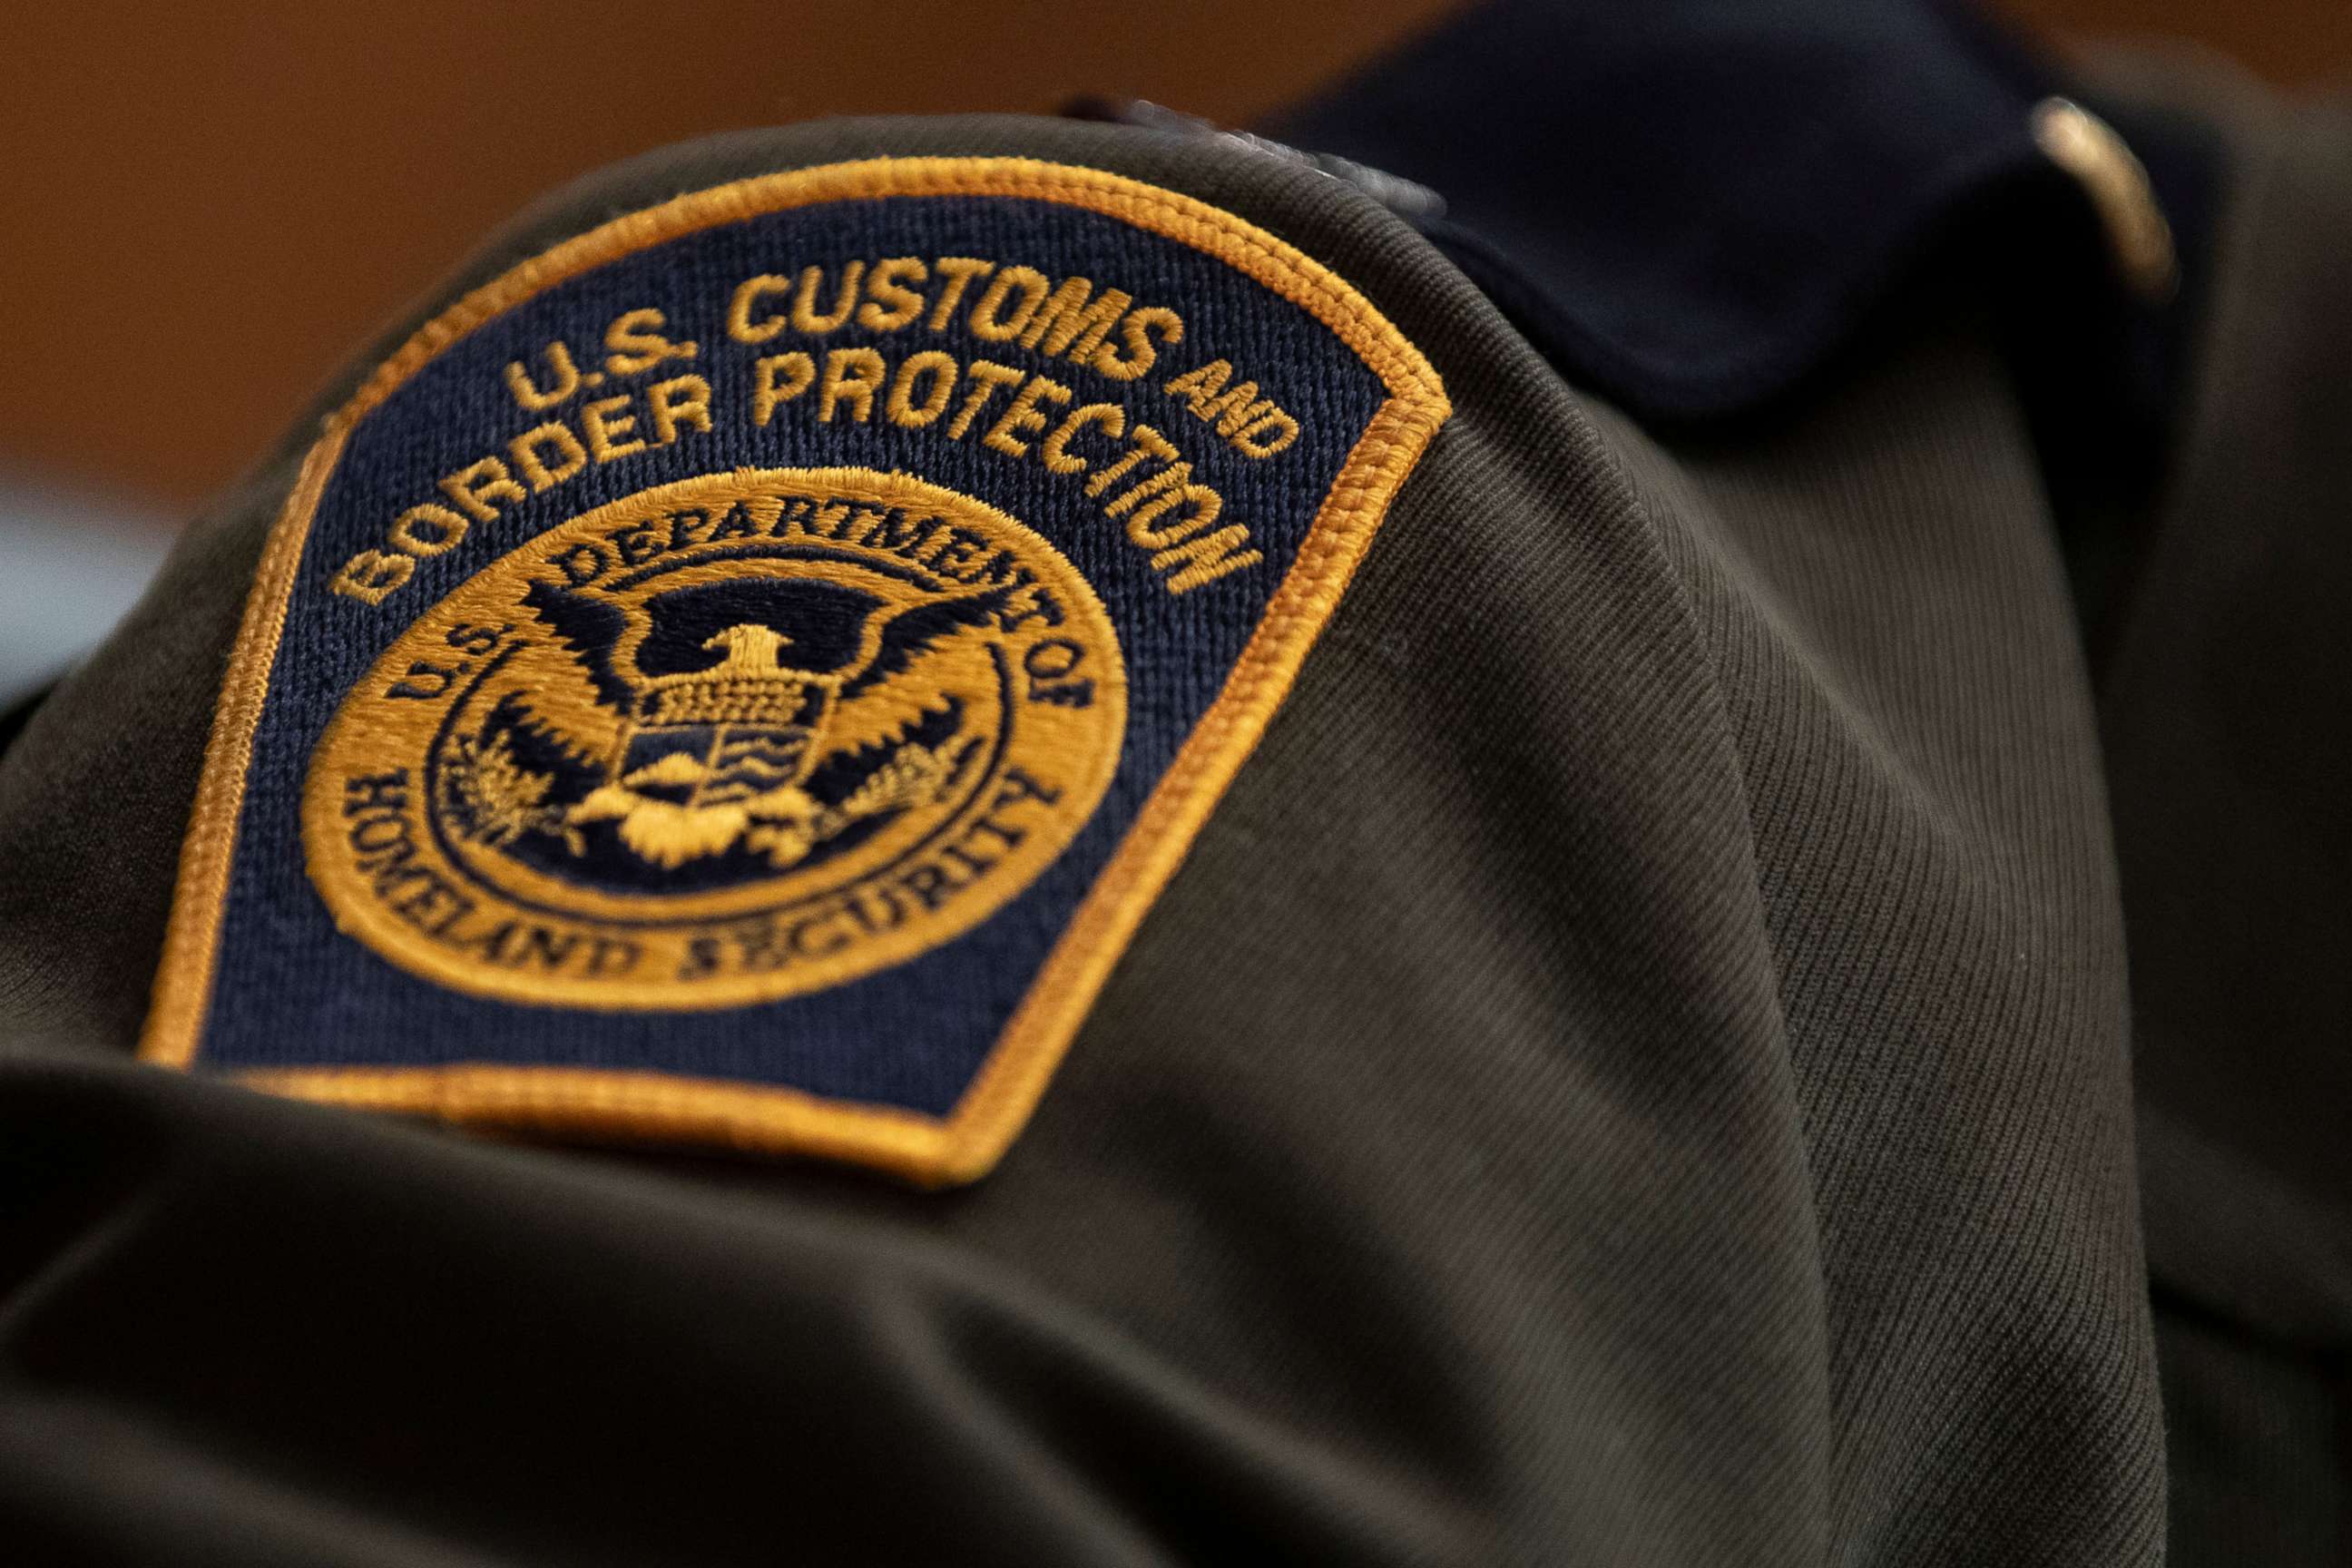 PHOTO: In this April 9, 2019, file photo, taken in Washington D.C., a U.S. Customs and Border Protection patch is shown on the uniform of a patrol agent for the U.S. Border Patrol.